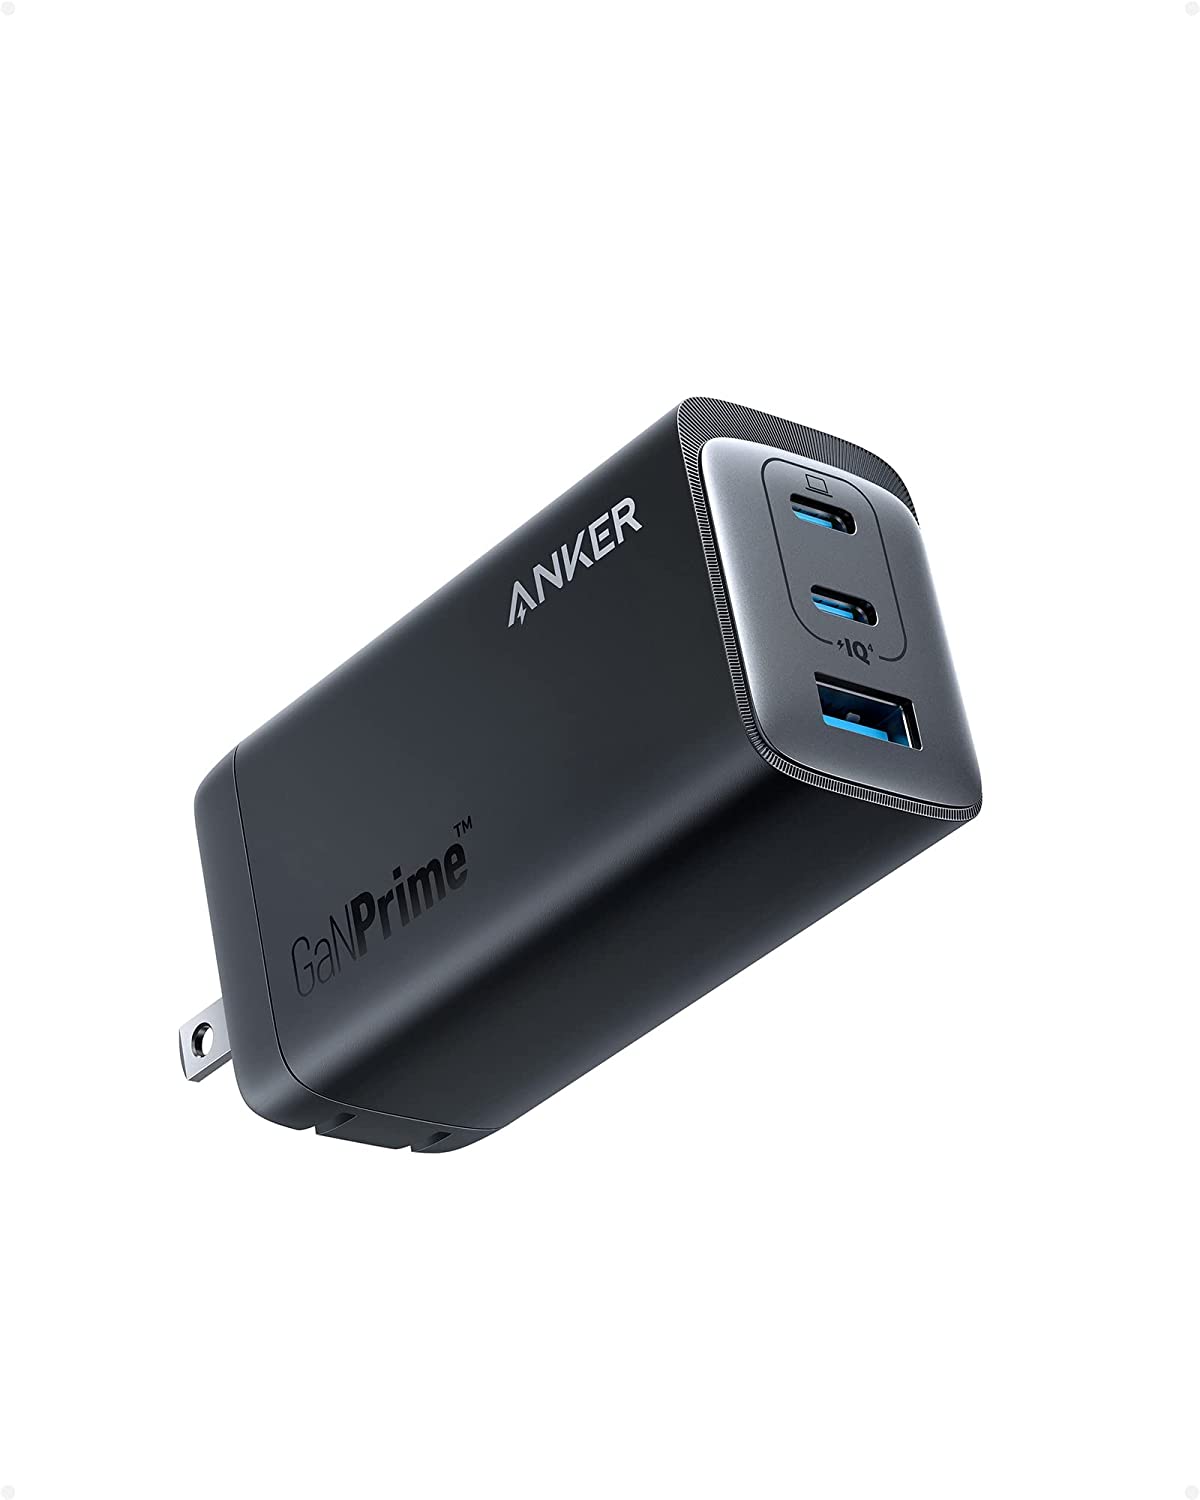 Anker 737 GaNPrime USB C Wall Charger 120W GaNPrime PPS 3-Port Fast Compact Foldable $56.99 Amazon